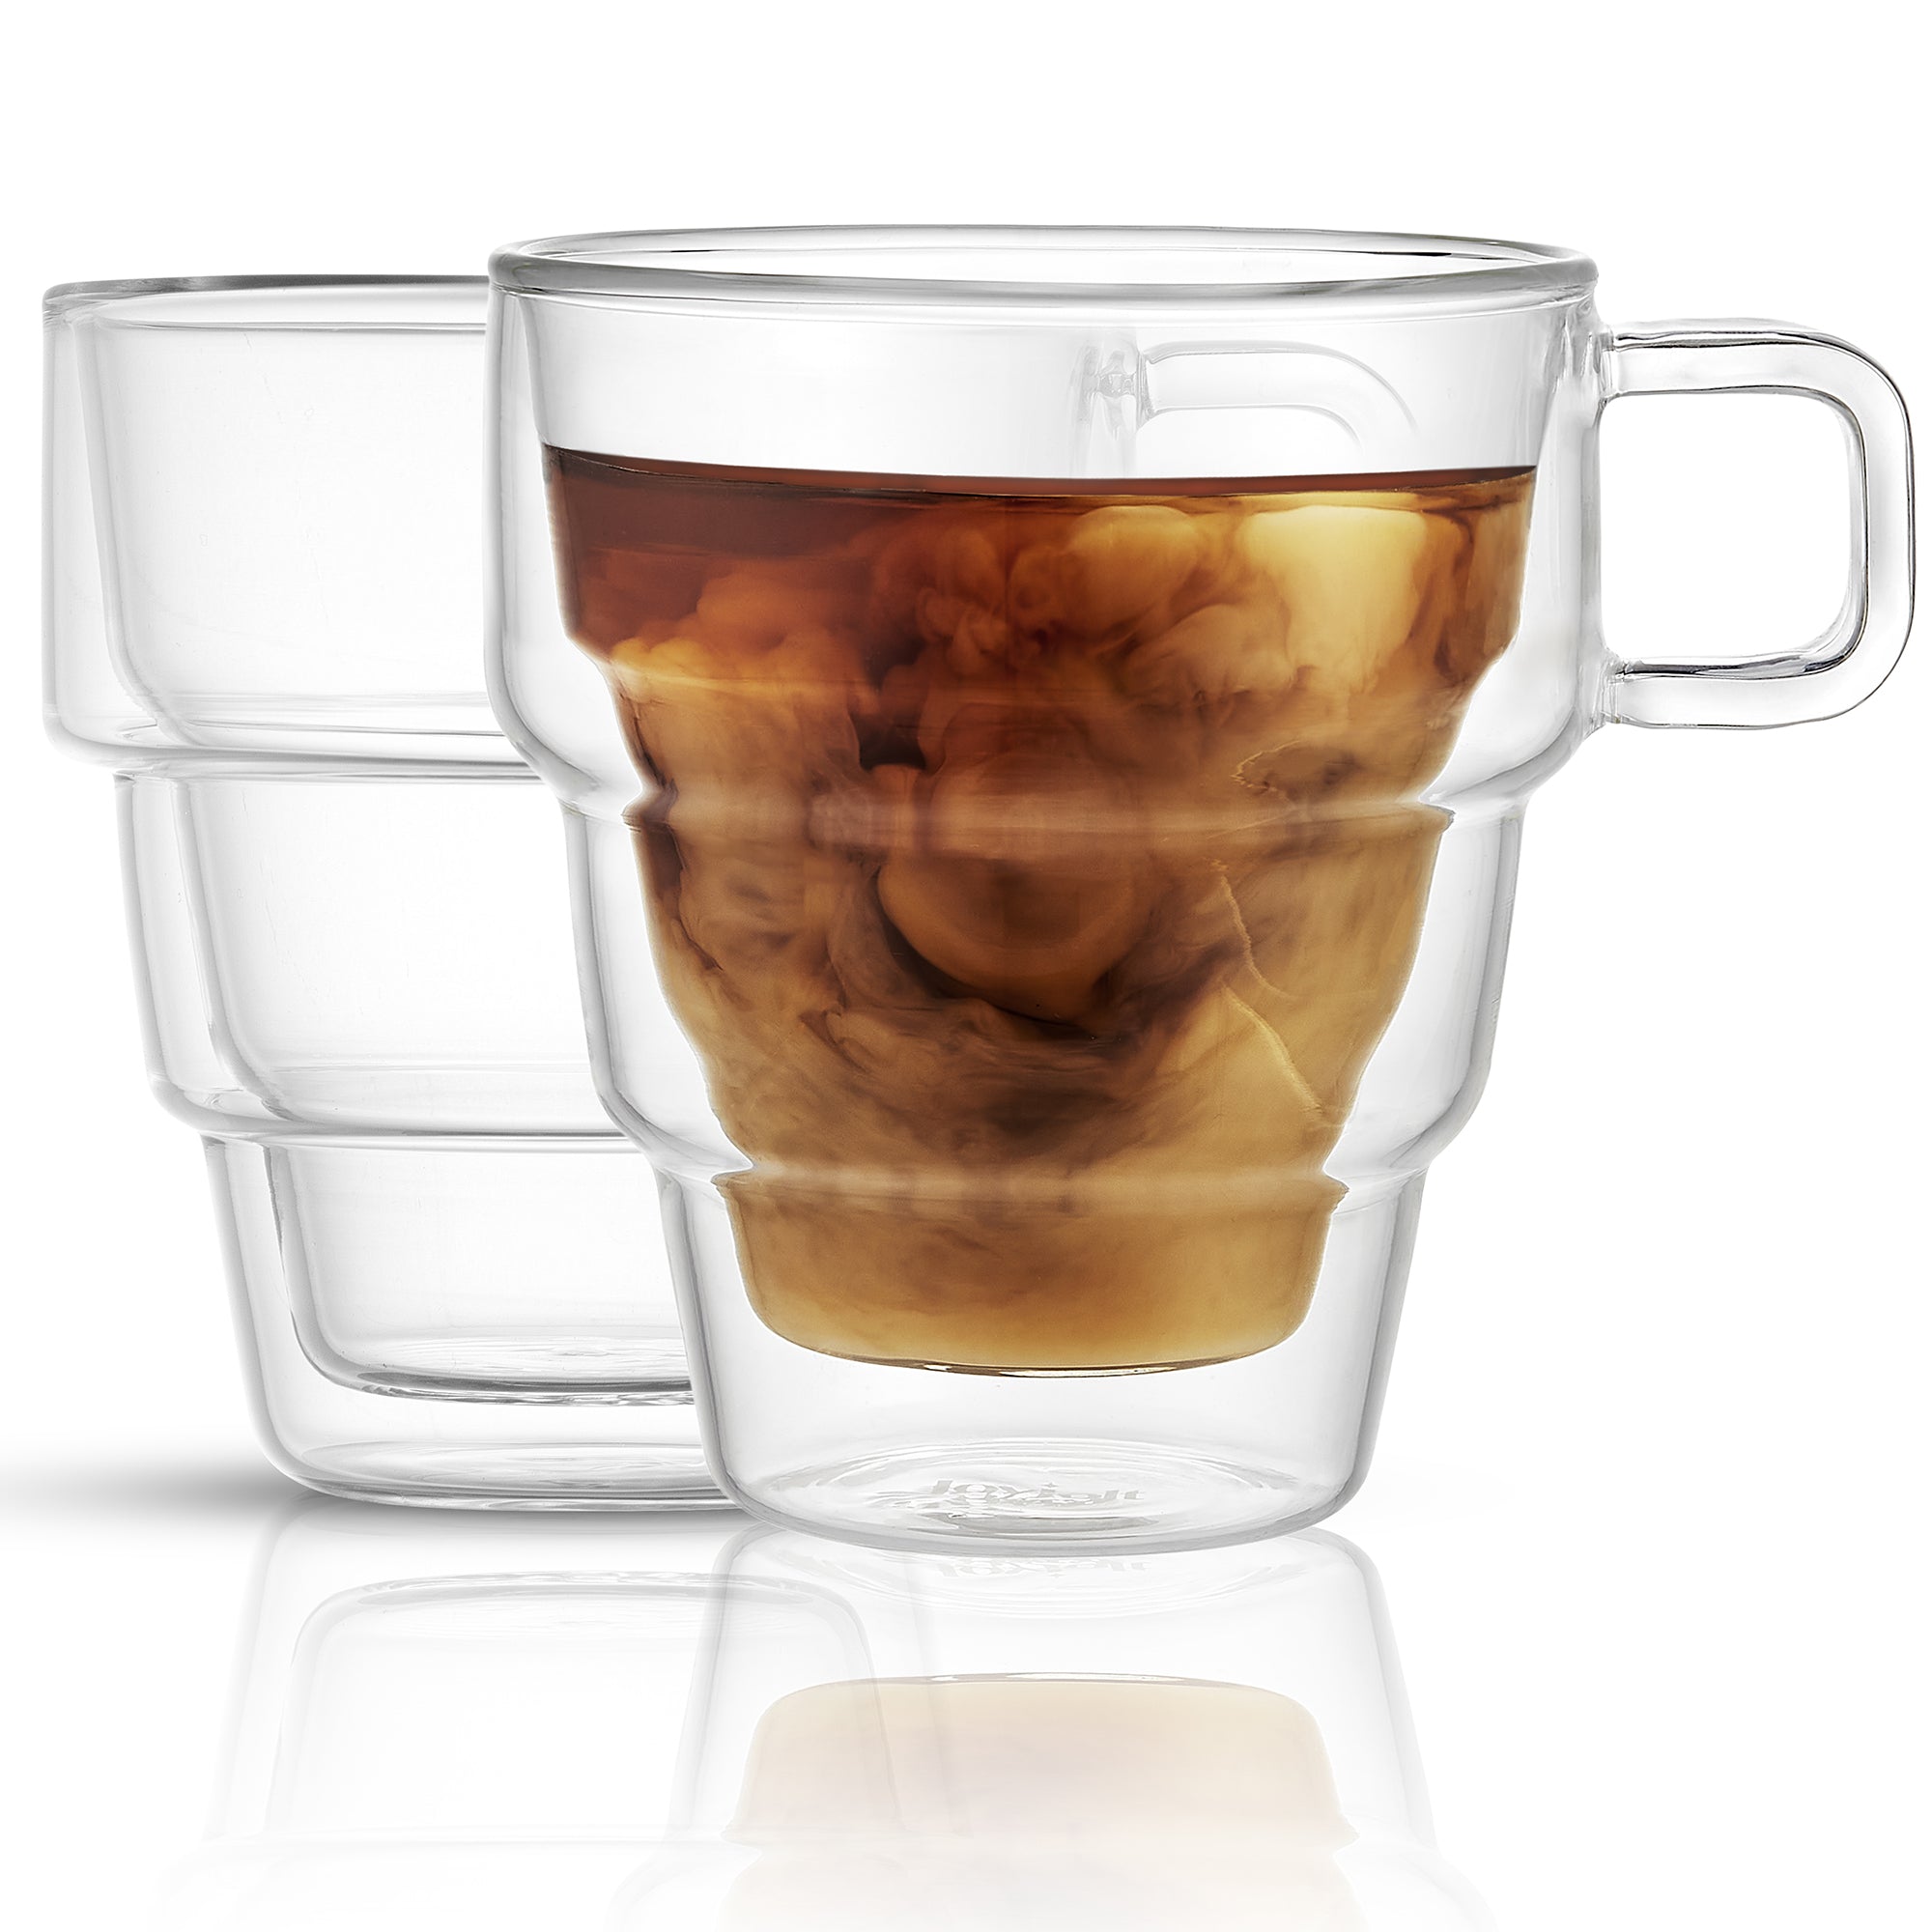 JoyJolt Stoiva Double Wall Insulated Coffee Mugs – 11.5 oz Glasses Set with  Handle, Ideal for Hot an…See more JoyJolt Stoiva Double Wall Insulated